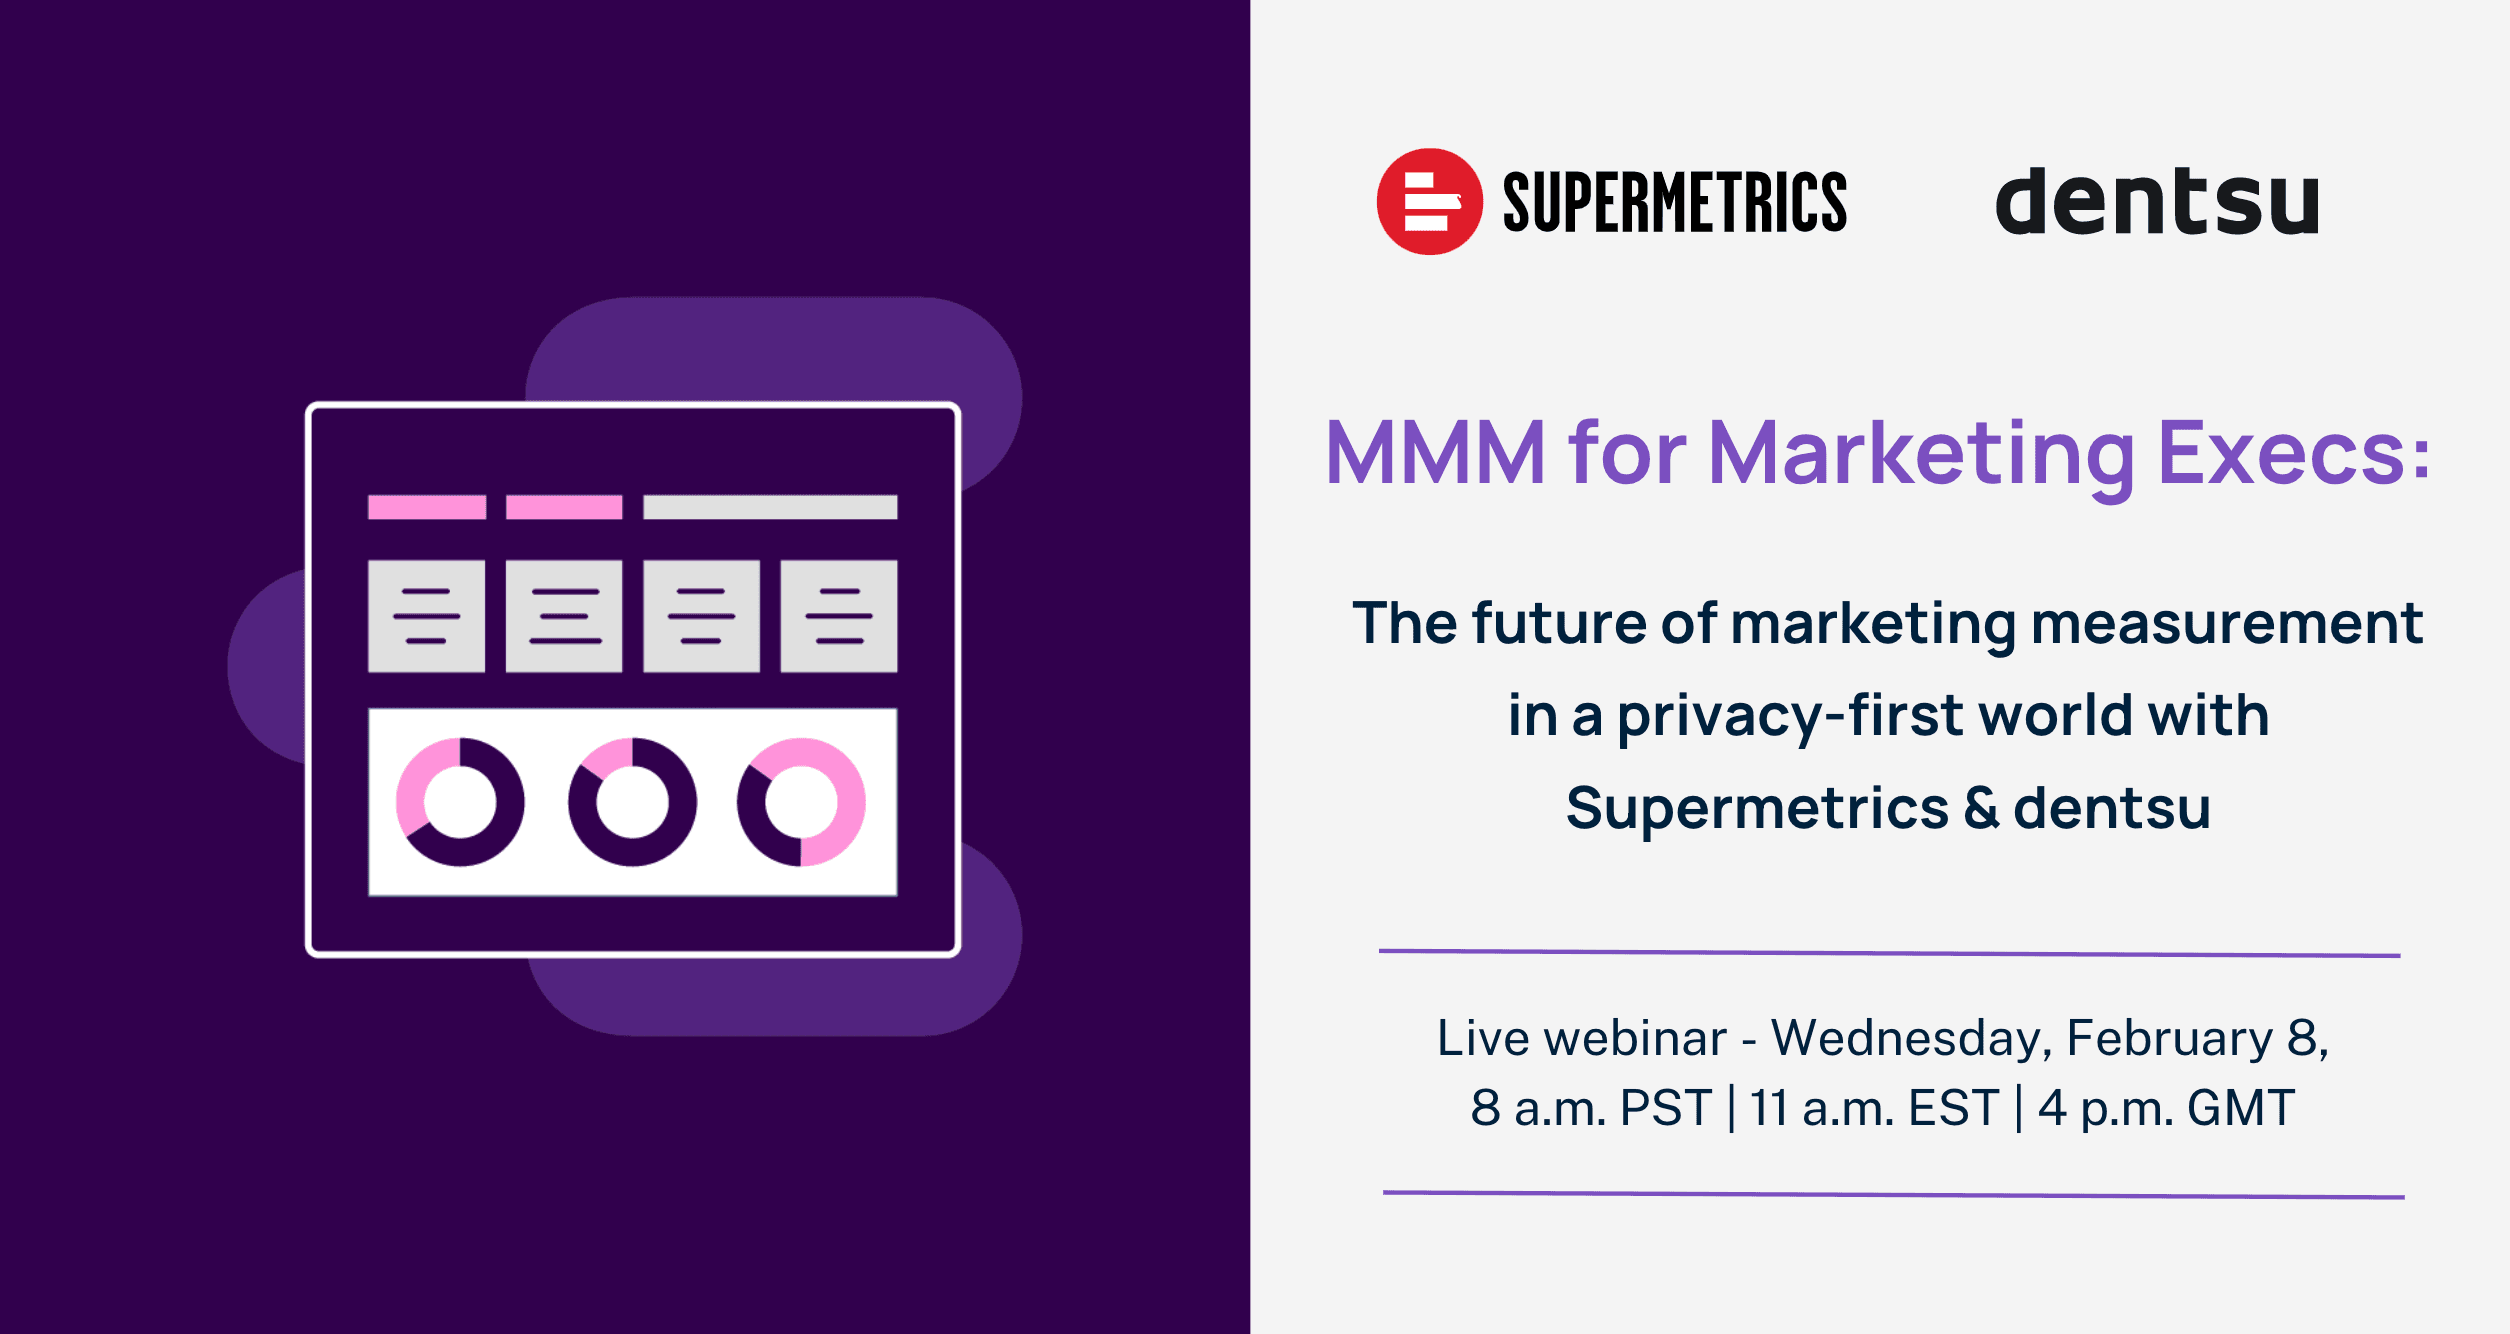 MMM for Marketing Execs: Marketing measurement in a privacy-first world with Supermetrics & dentsu